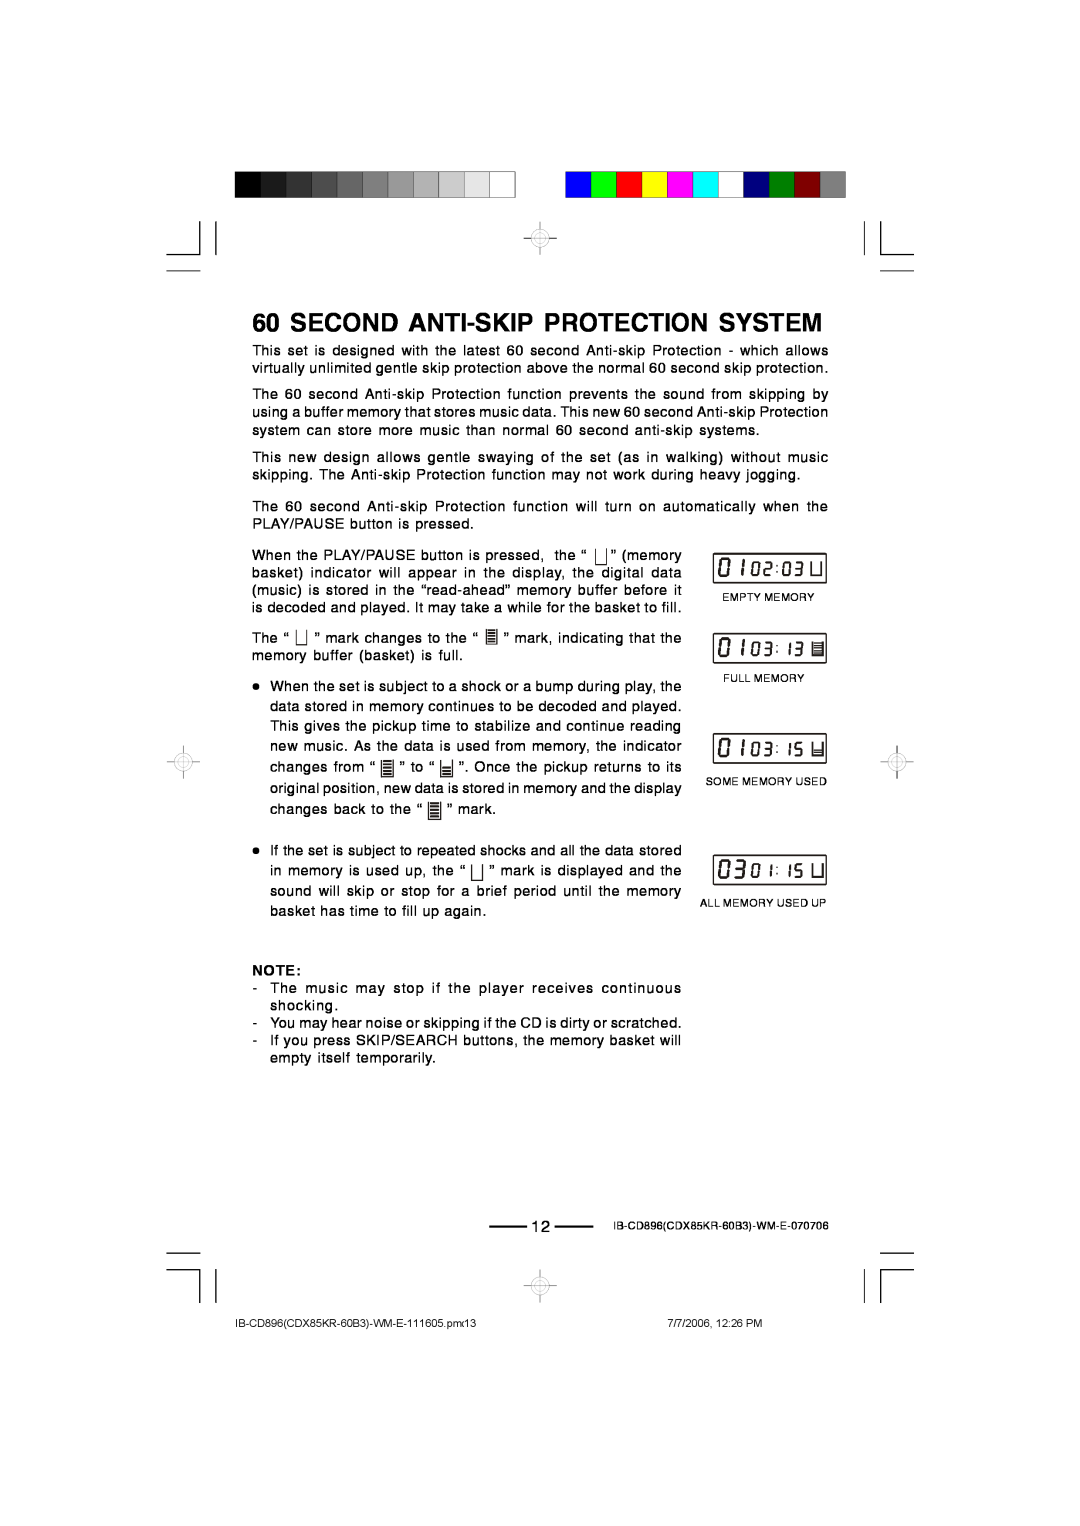 Lenoxx Electronics CD-896 operating instructions Second Anti-Skipprotection System 